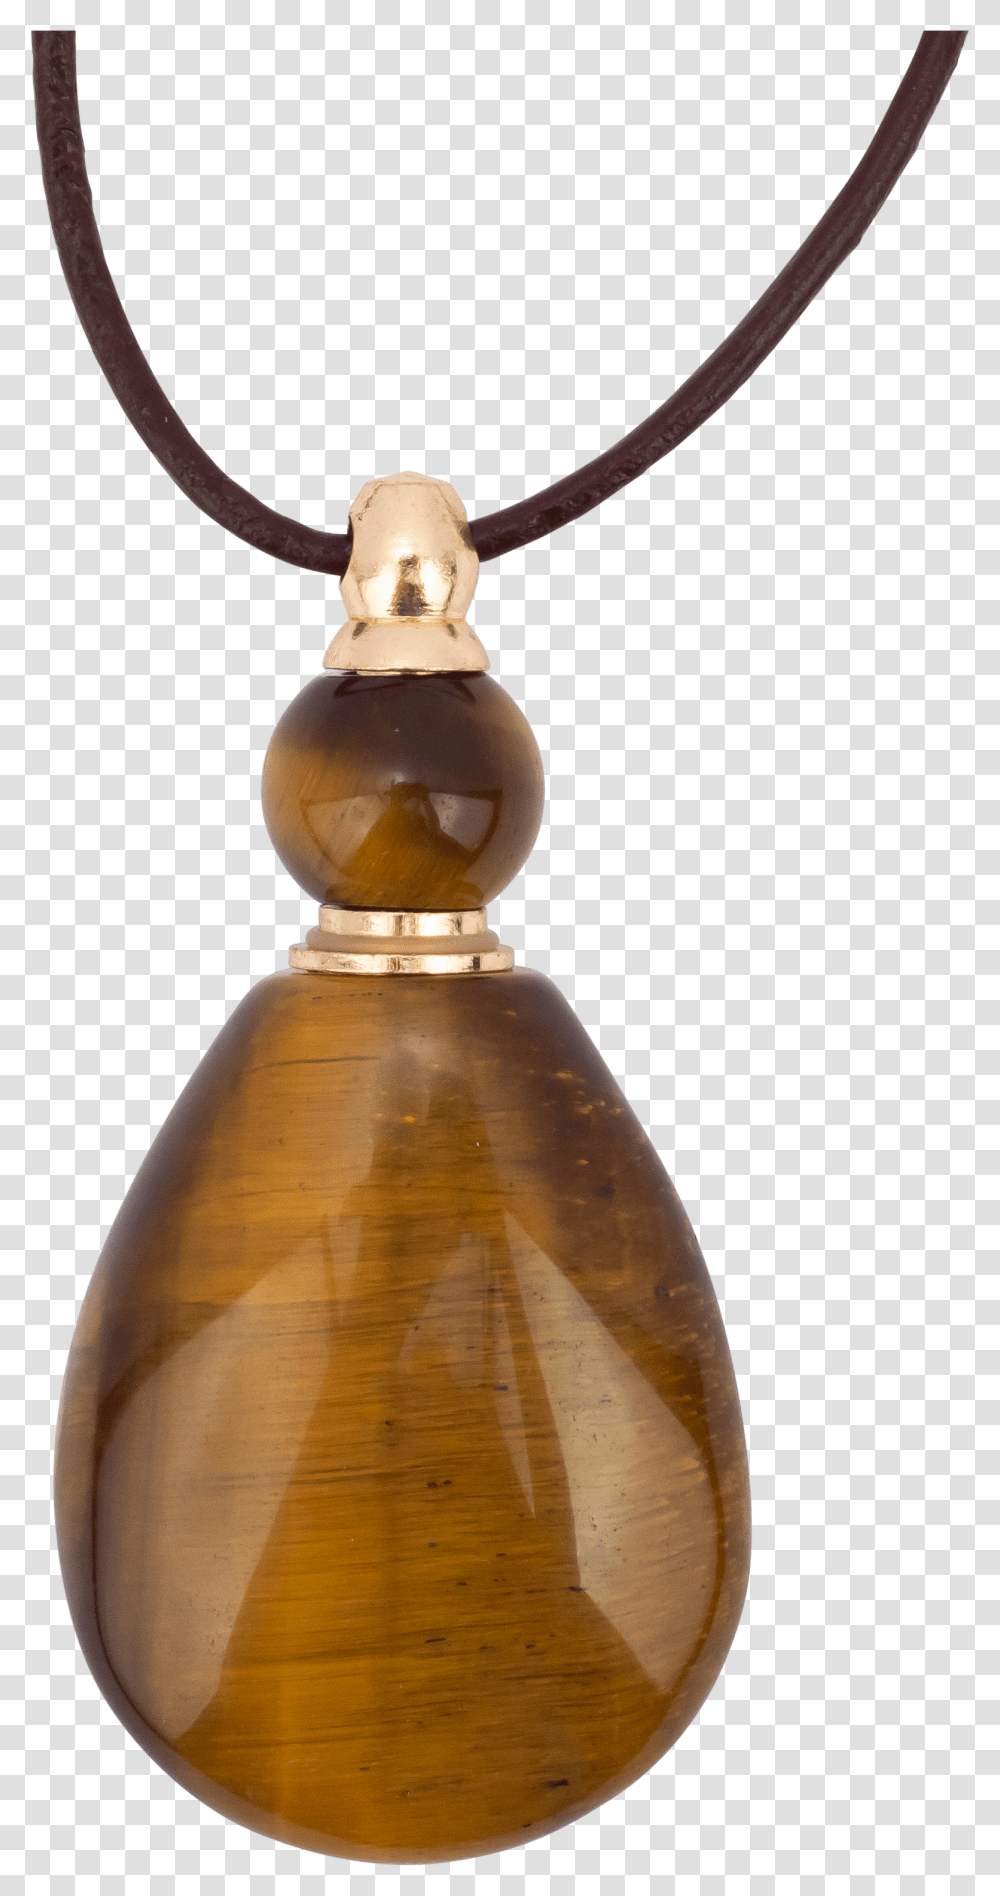 Zengo Tigers Eye Natural Stone Vial Necklace Locket, Lamp, Bottle, Perfume, Cosmetics Transparent Png